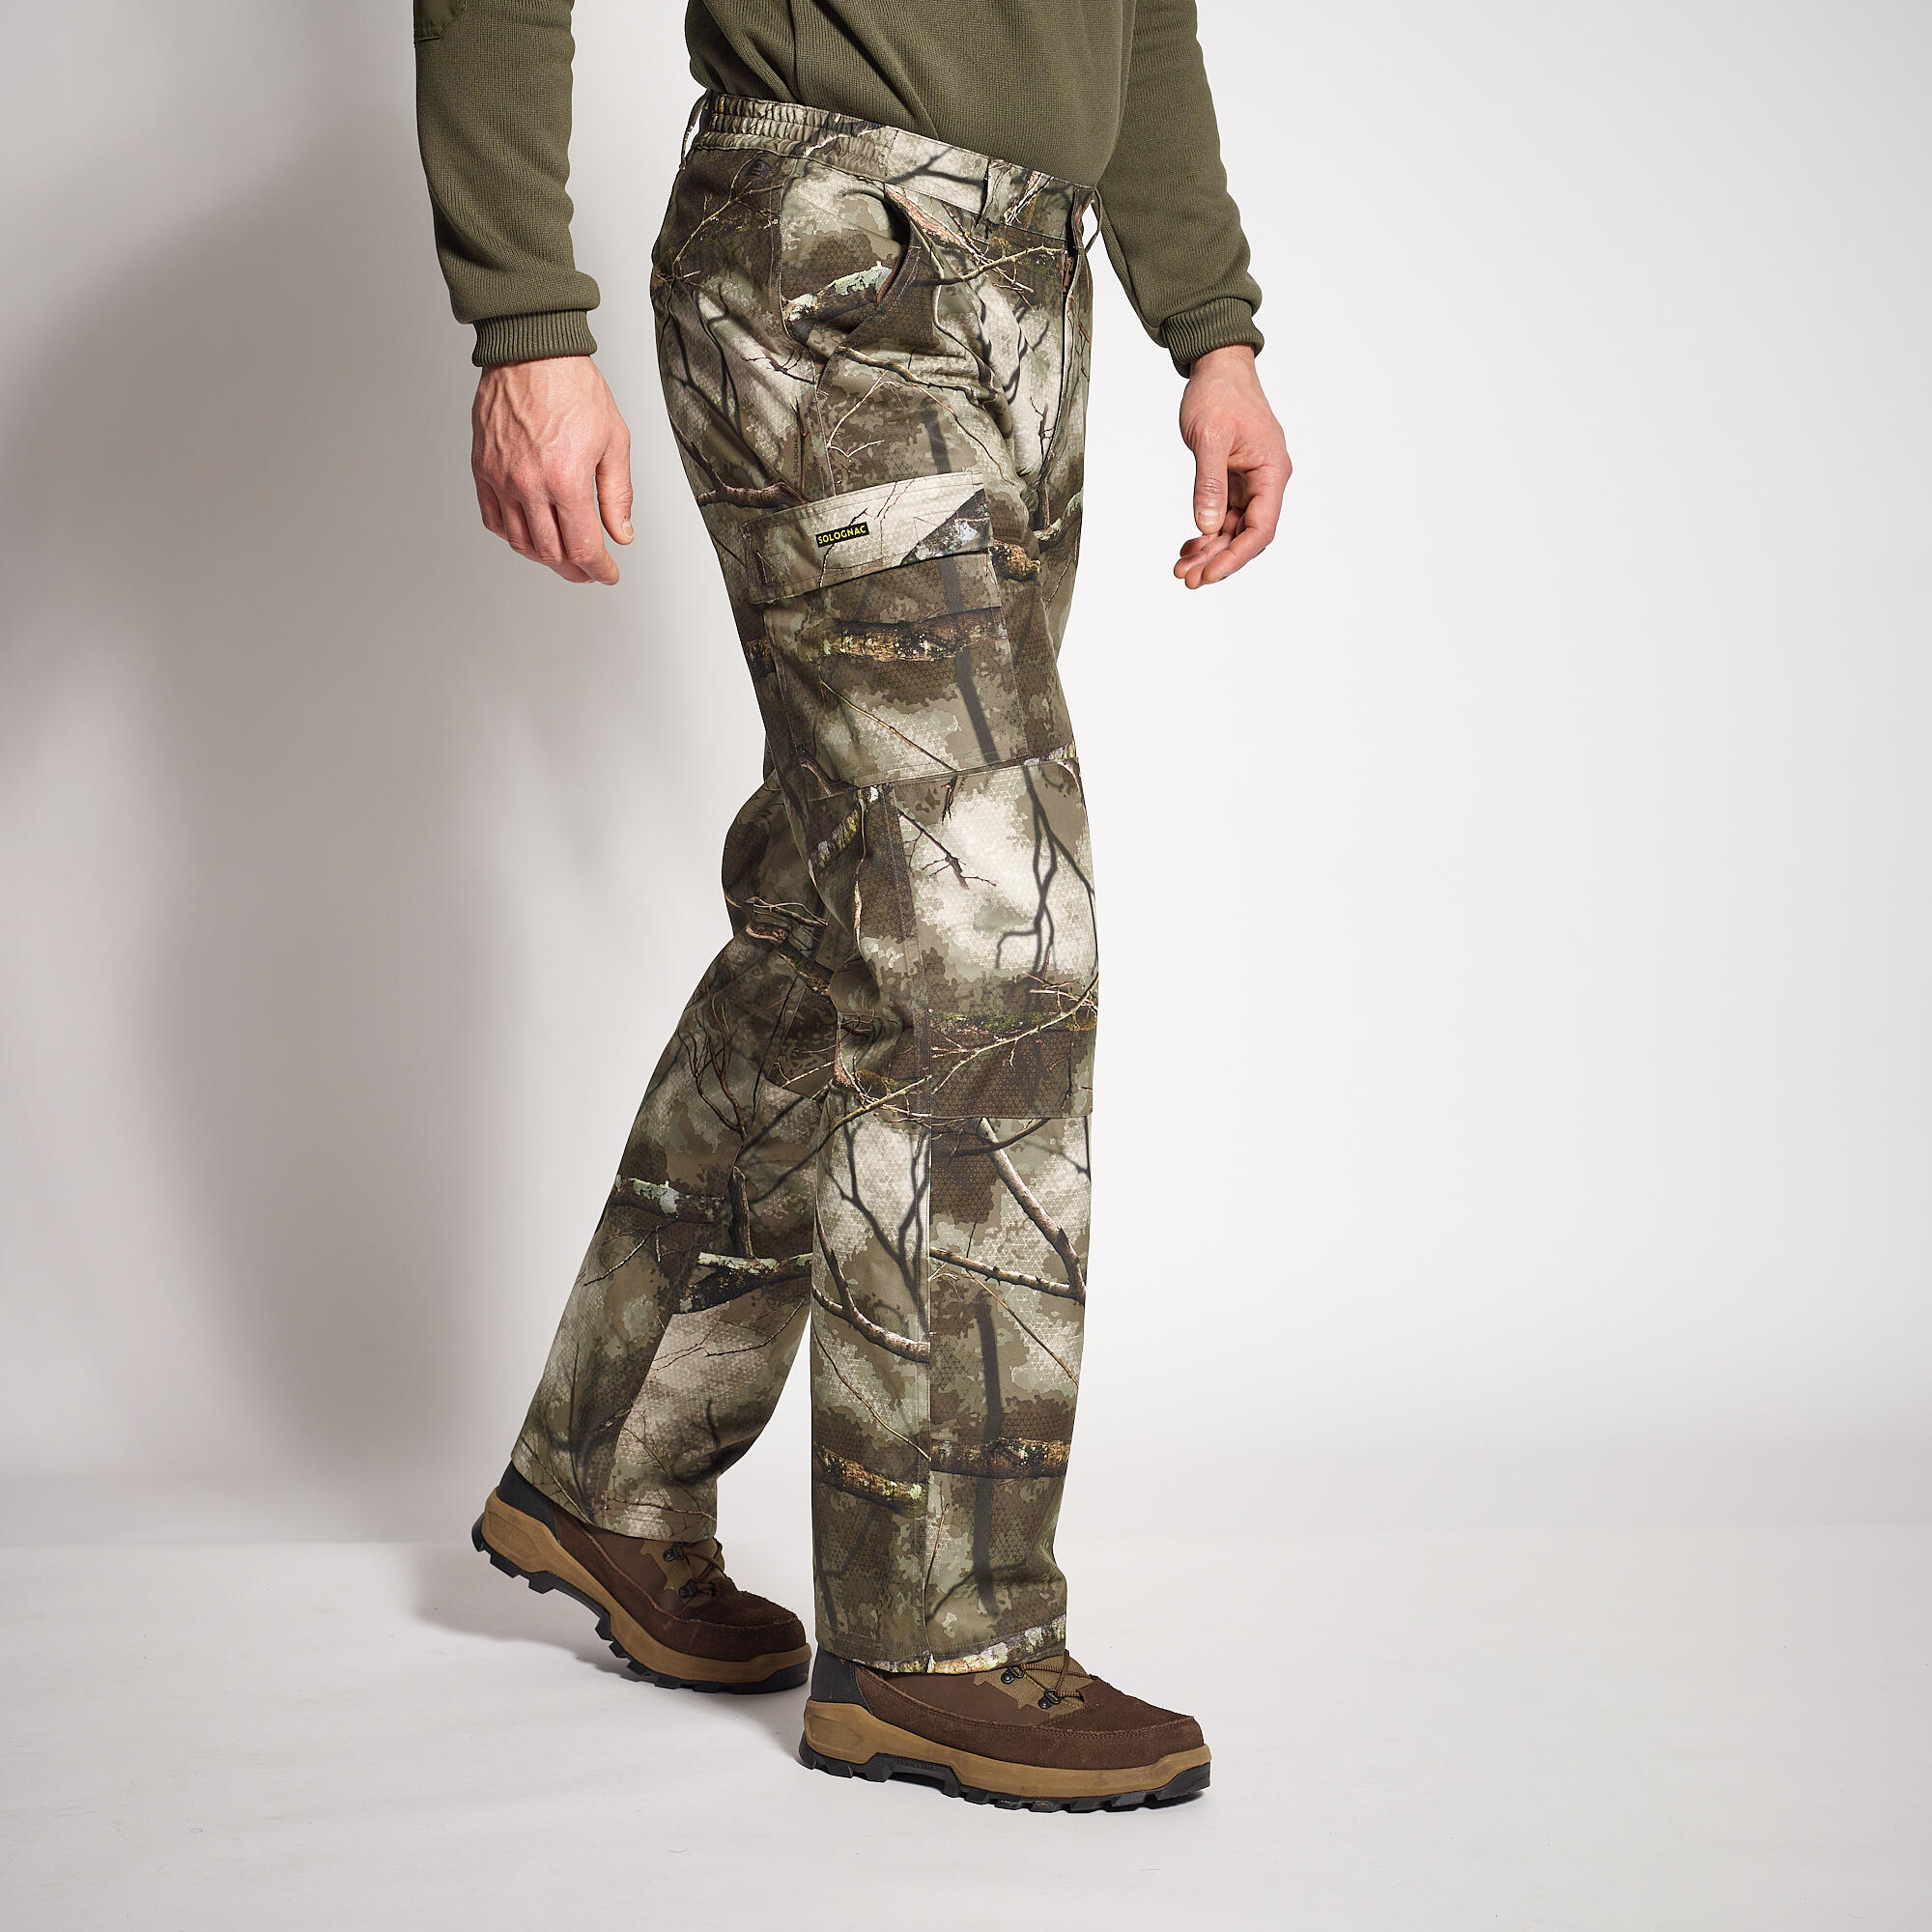 MFH Tactical Military BDU Trousers Mens Airsoft Hunting Cargo Pants HDT Camo  AU | eBay